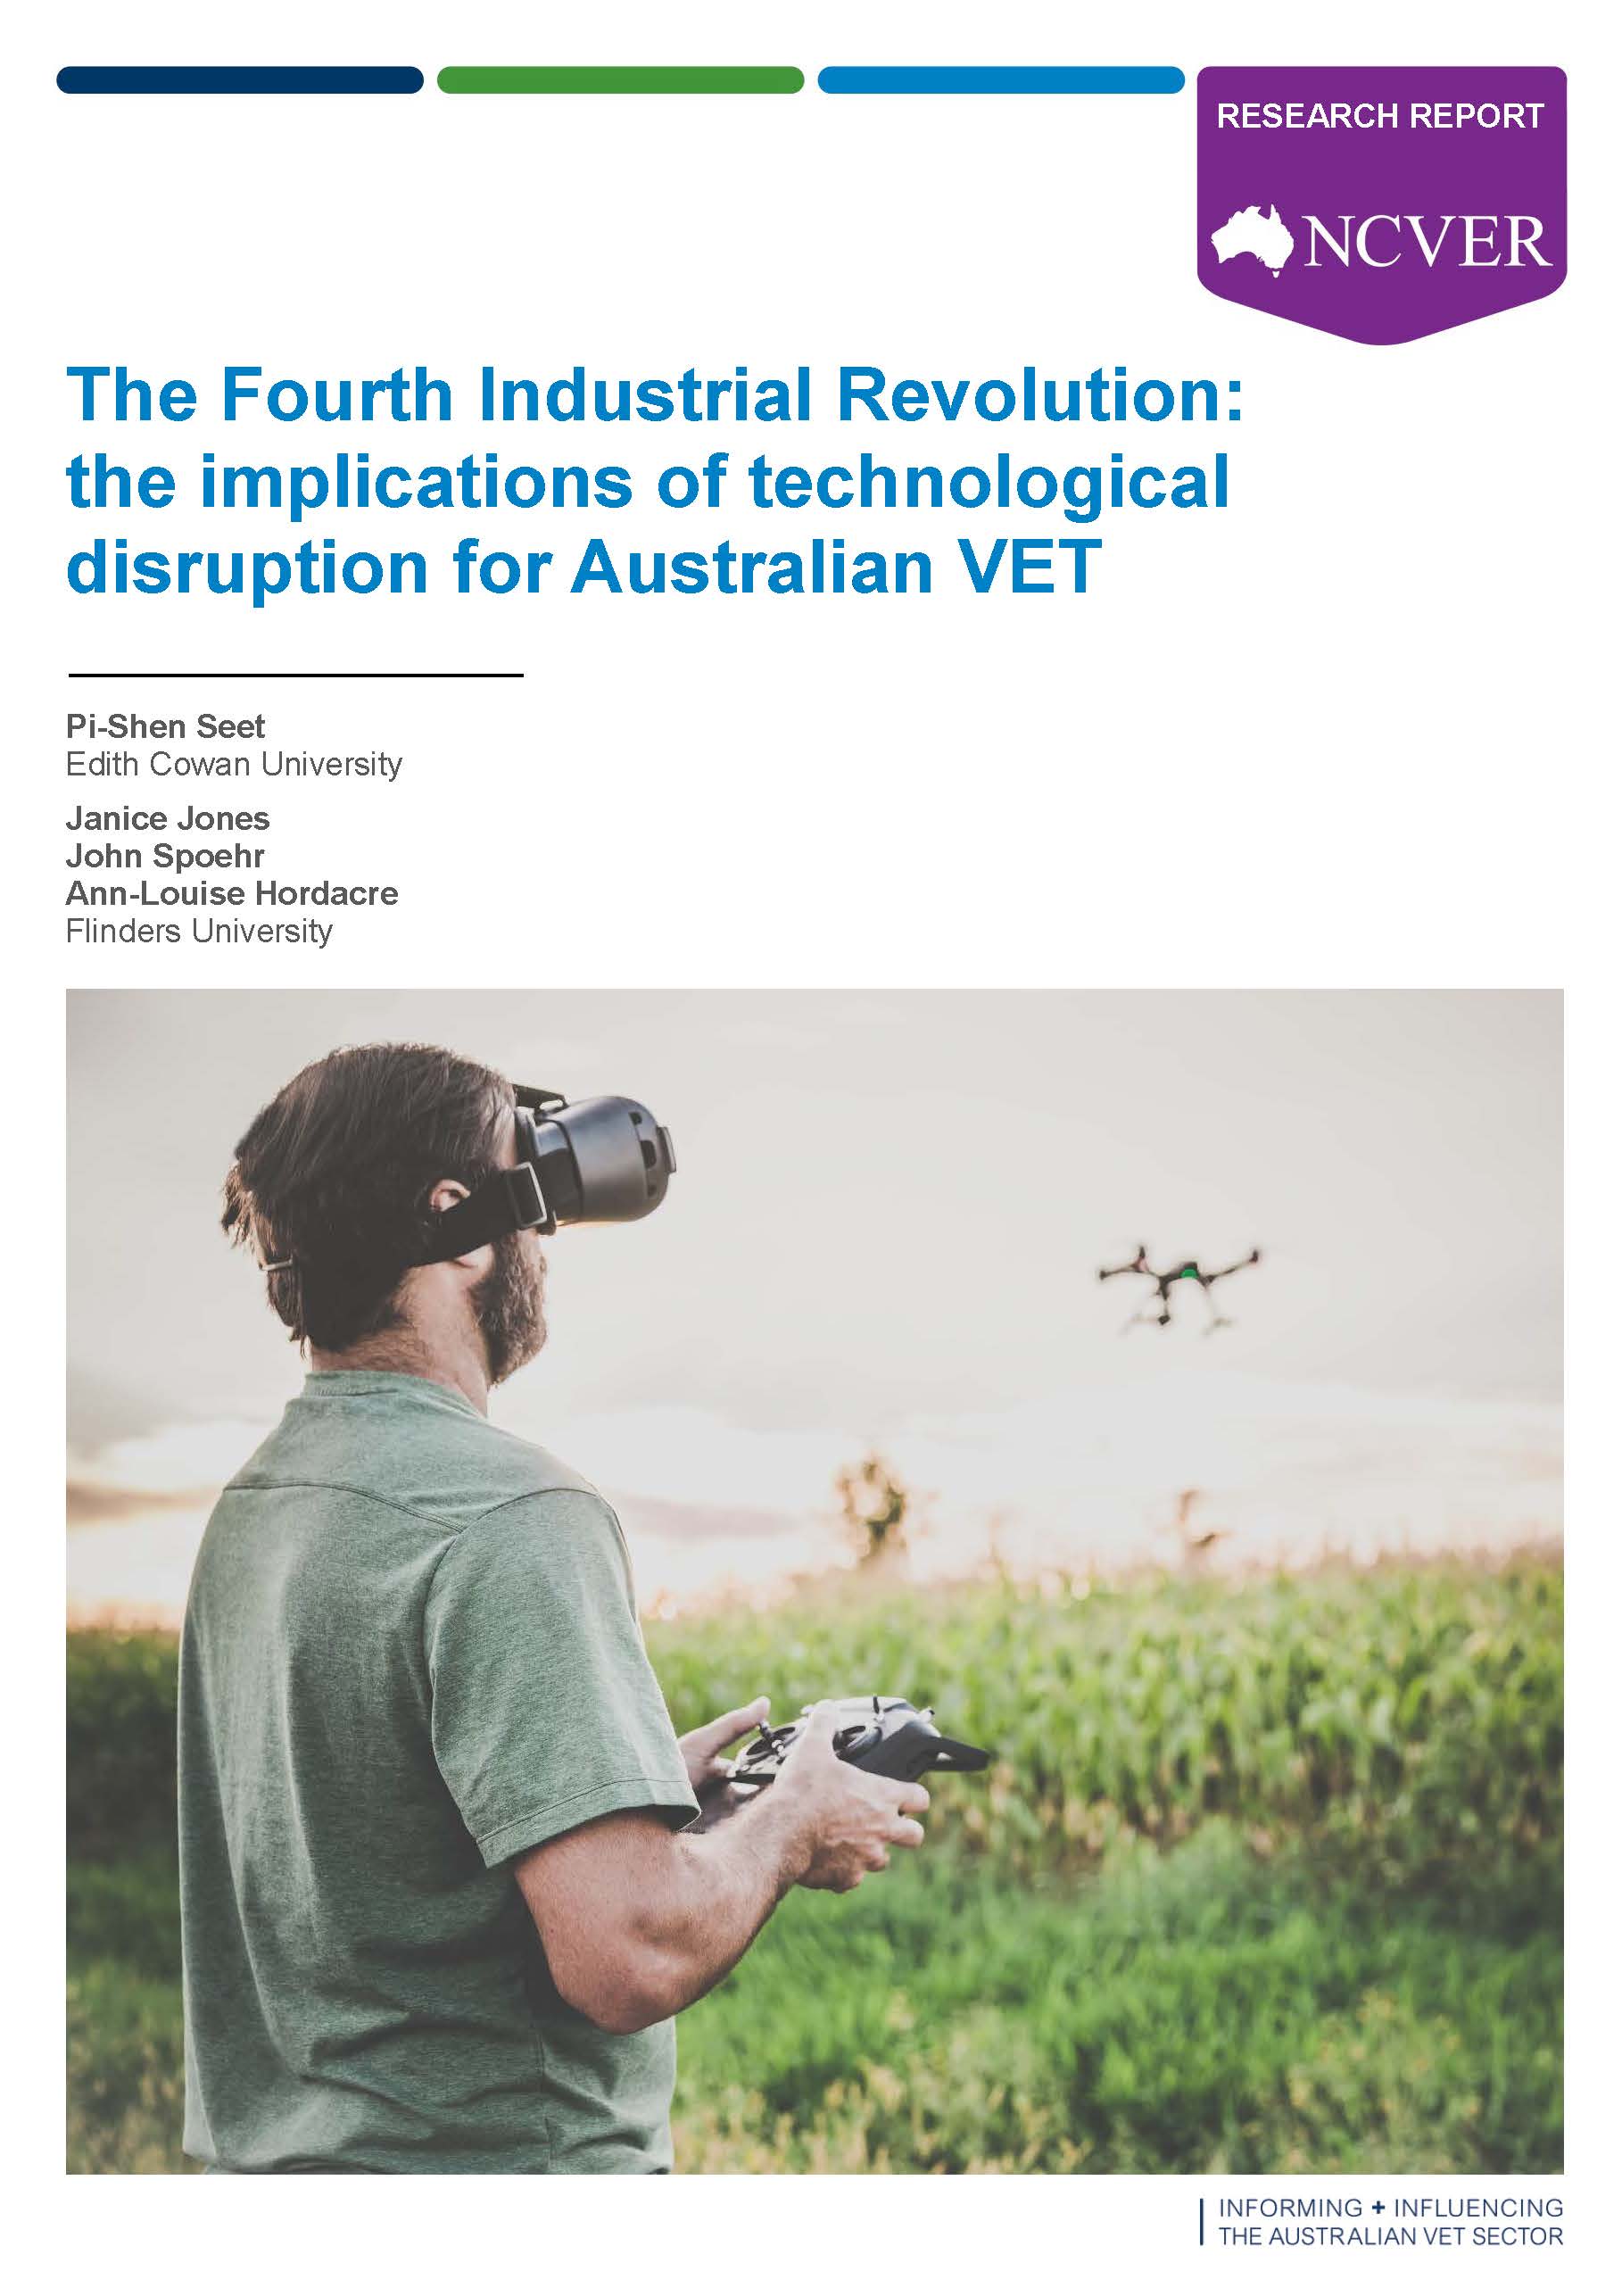 The Fourth Industrial Revolution - the implications of technological disruption for Australian VET